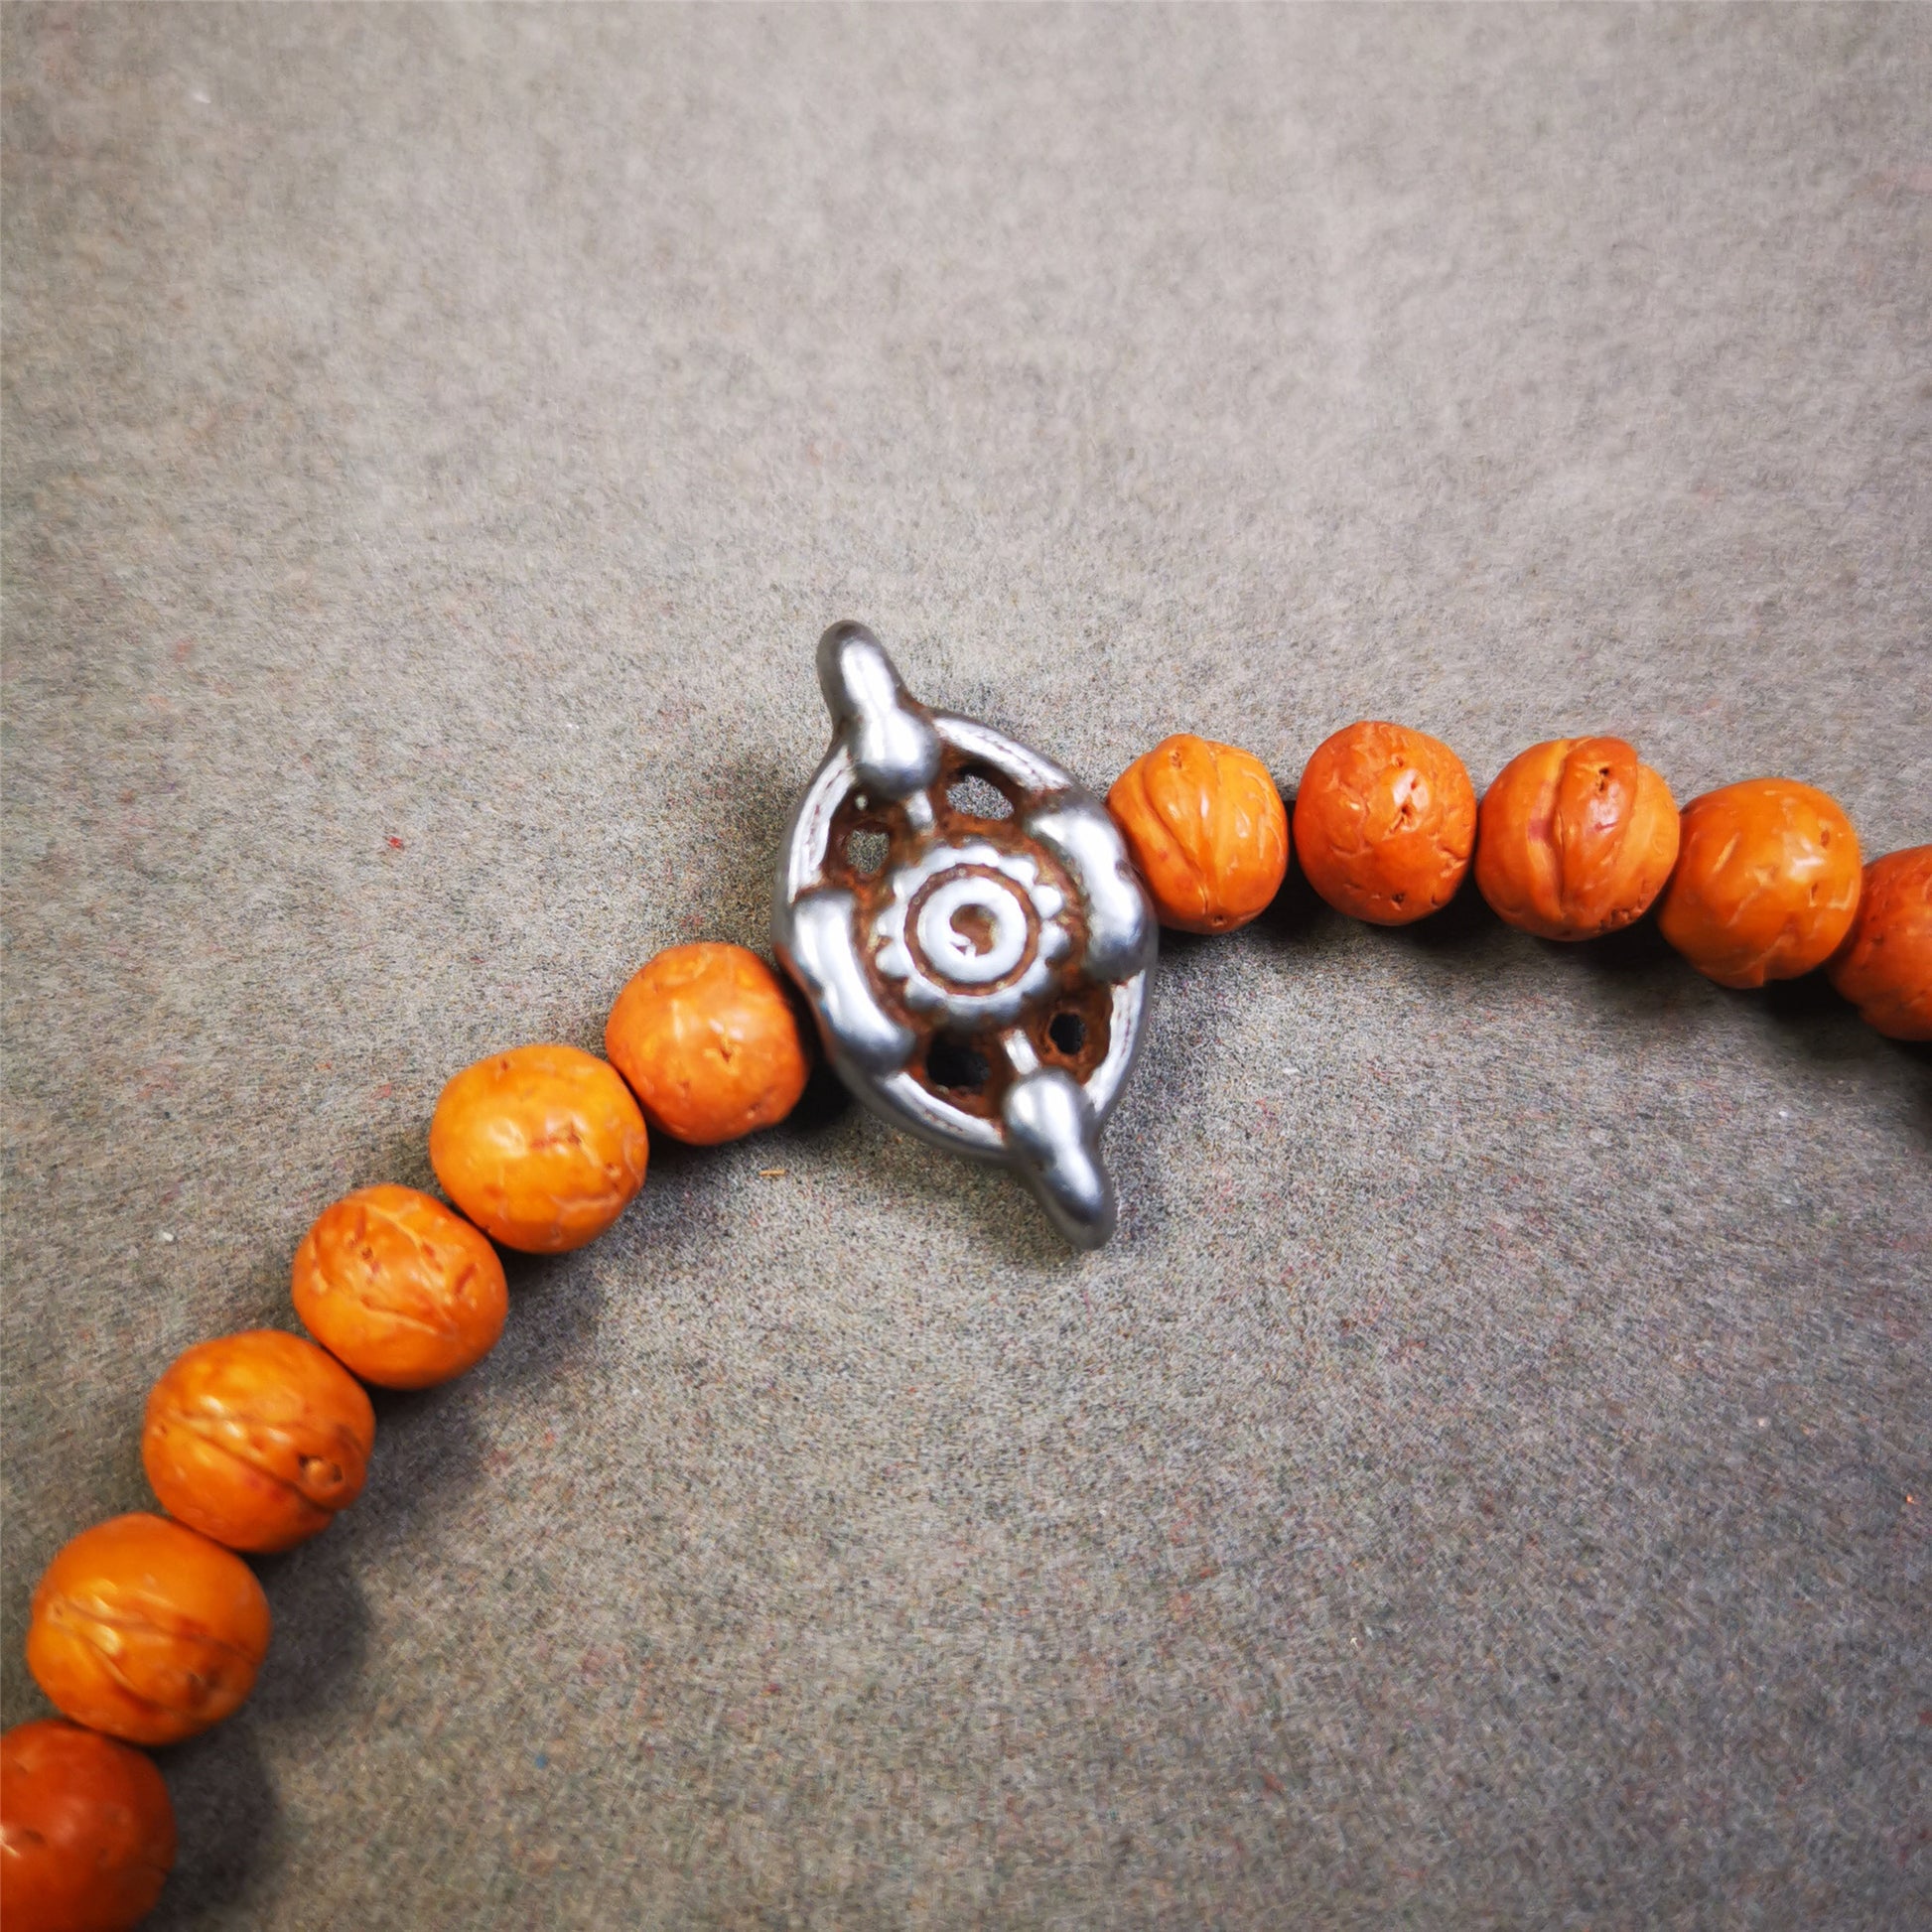 This unique cross vajra pendant was made by Tibetan craftsmen.  You can use it as a spacer bead on mala,or pendant bead under guru bead. Also can be use as amulet pendant or keychain.